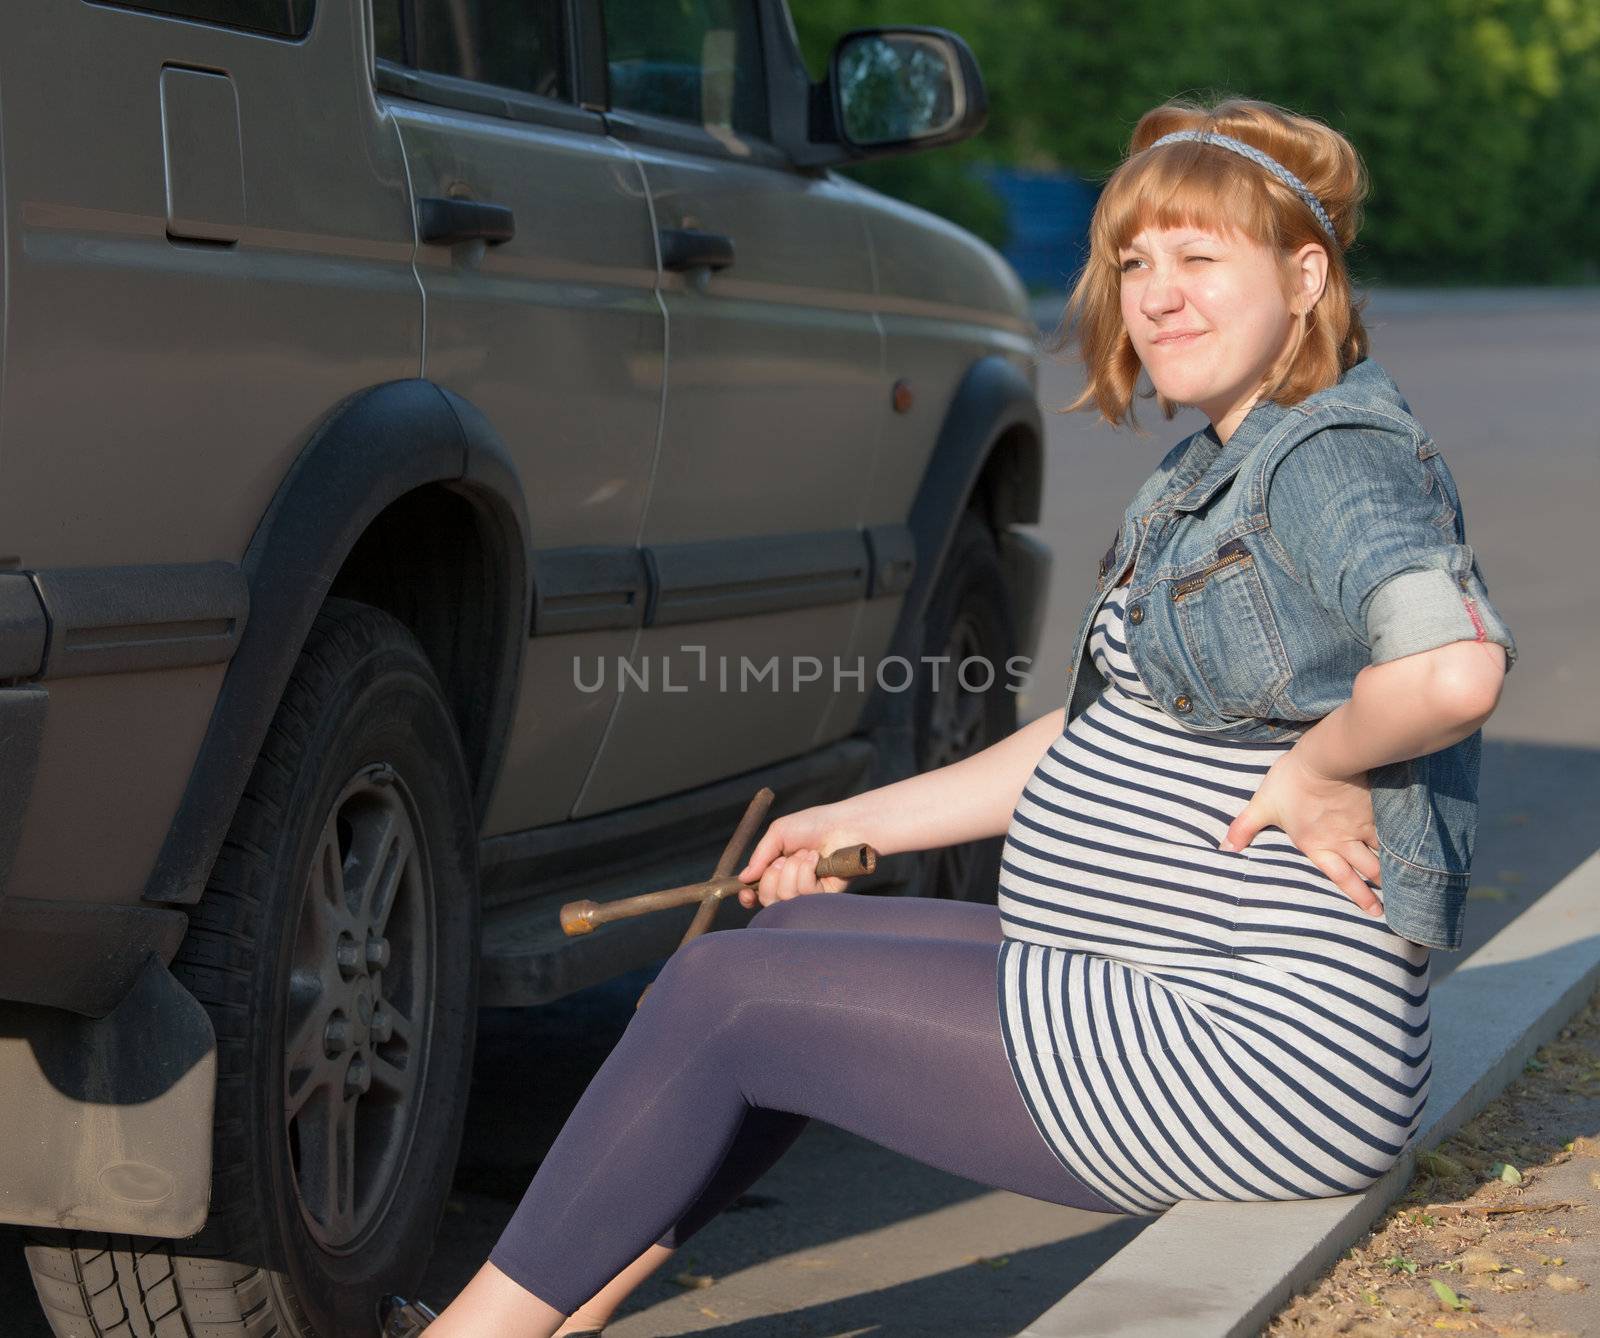 Pregnant Woman with a Wheel Brace near Car by Discovod